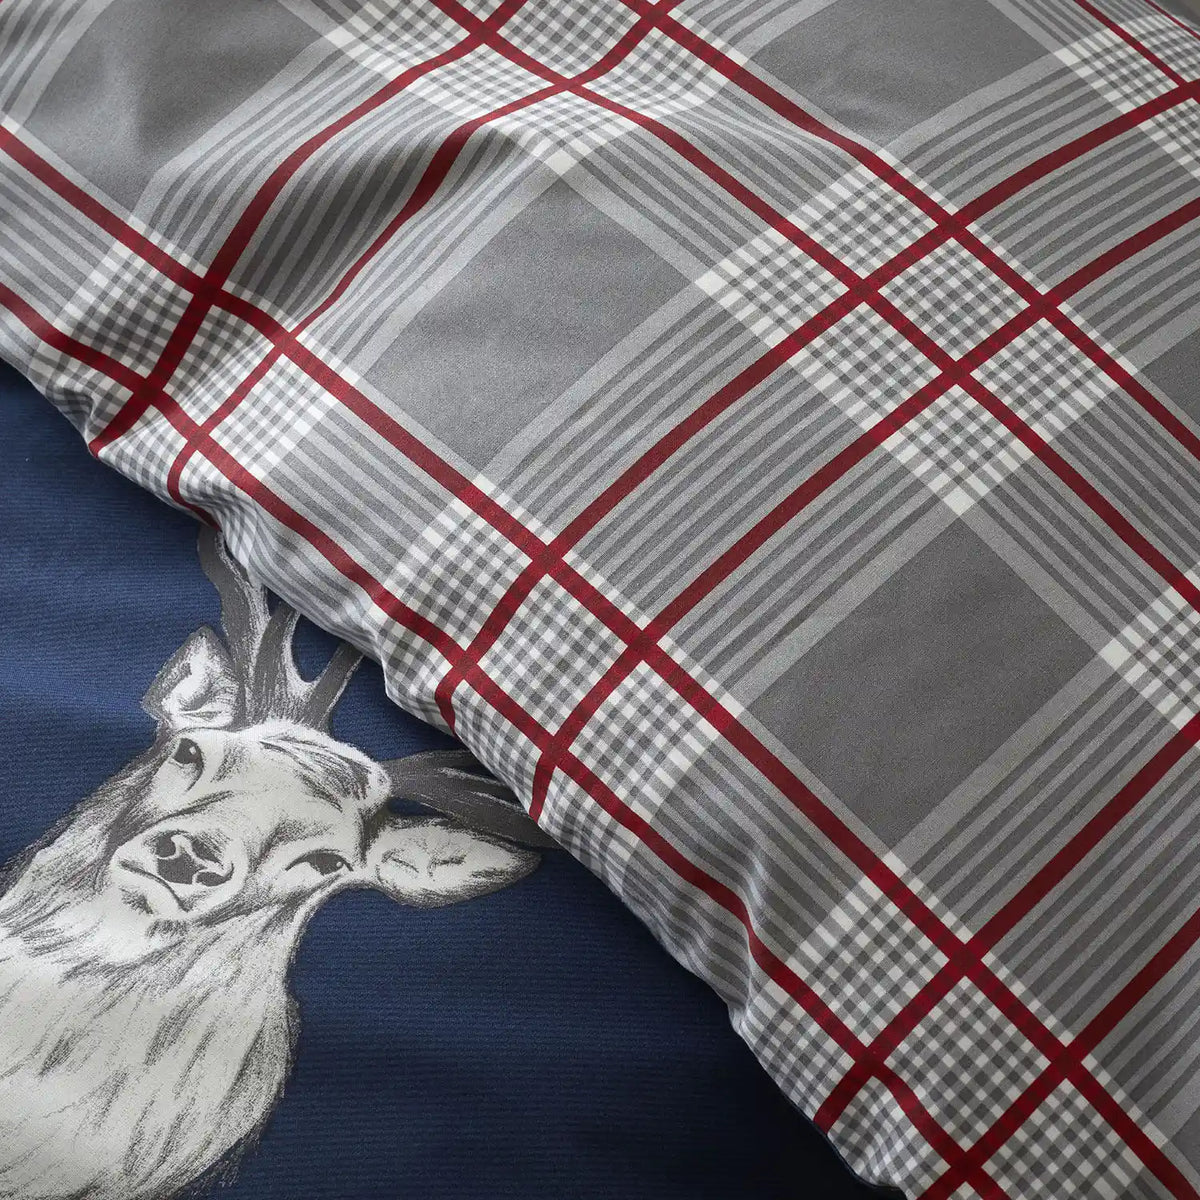 Stag Check Duvet Cover Set With Pillowcases - Navy